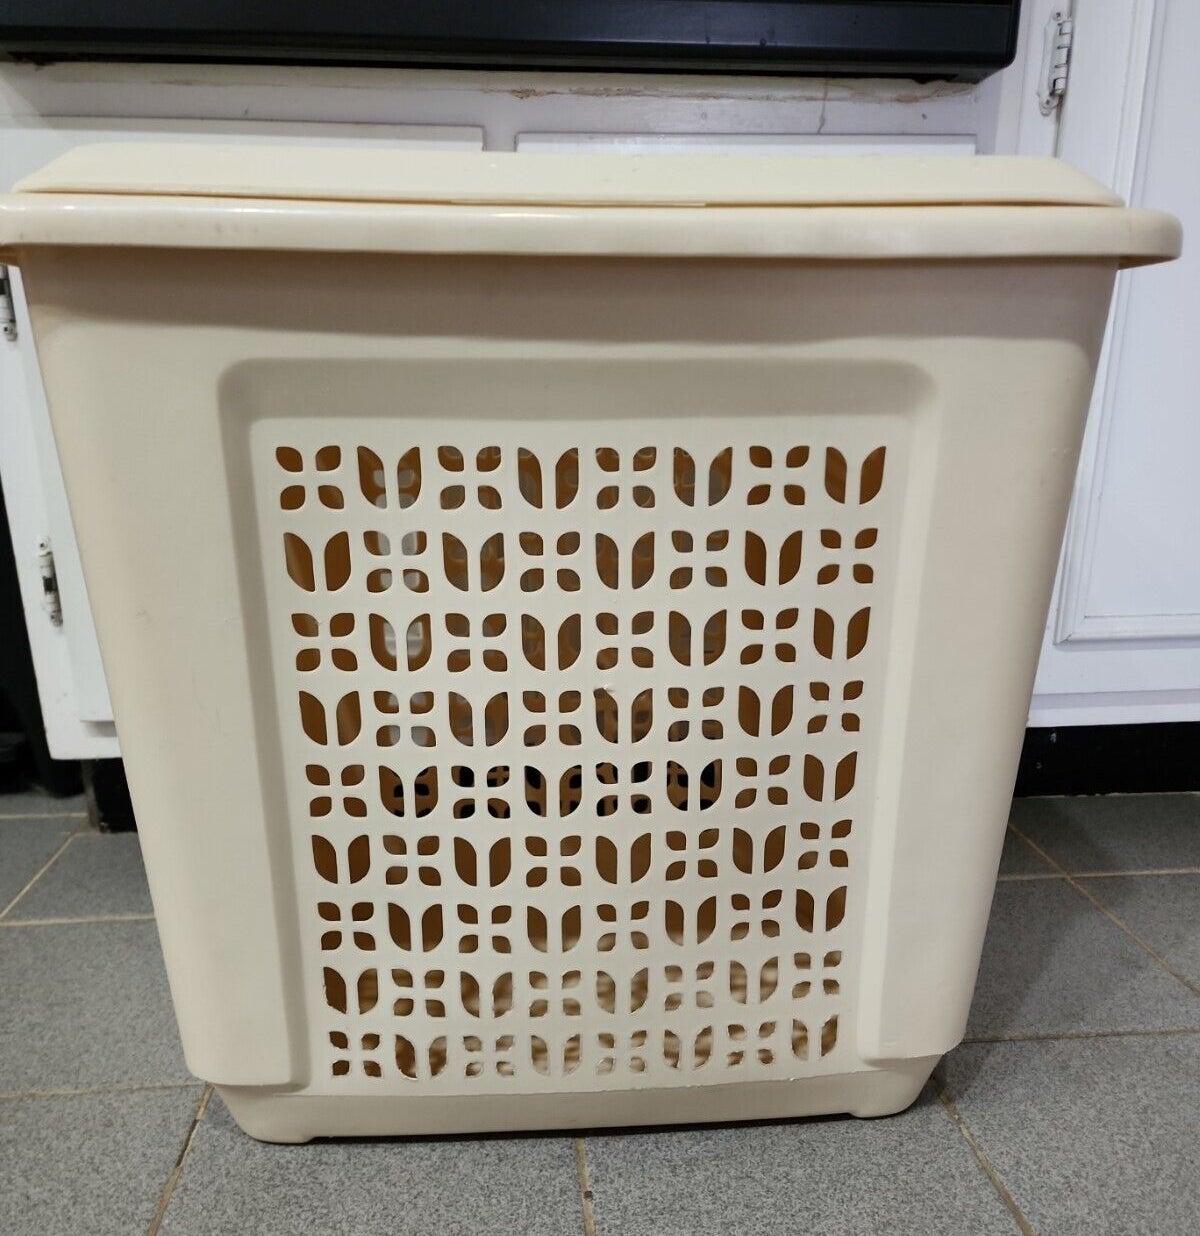 Beige laundry basket in front of a kitchen cabinet